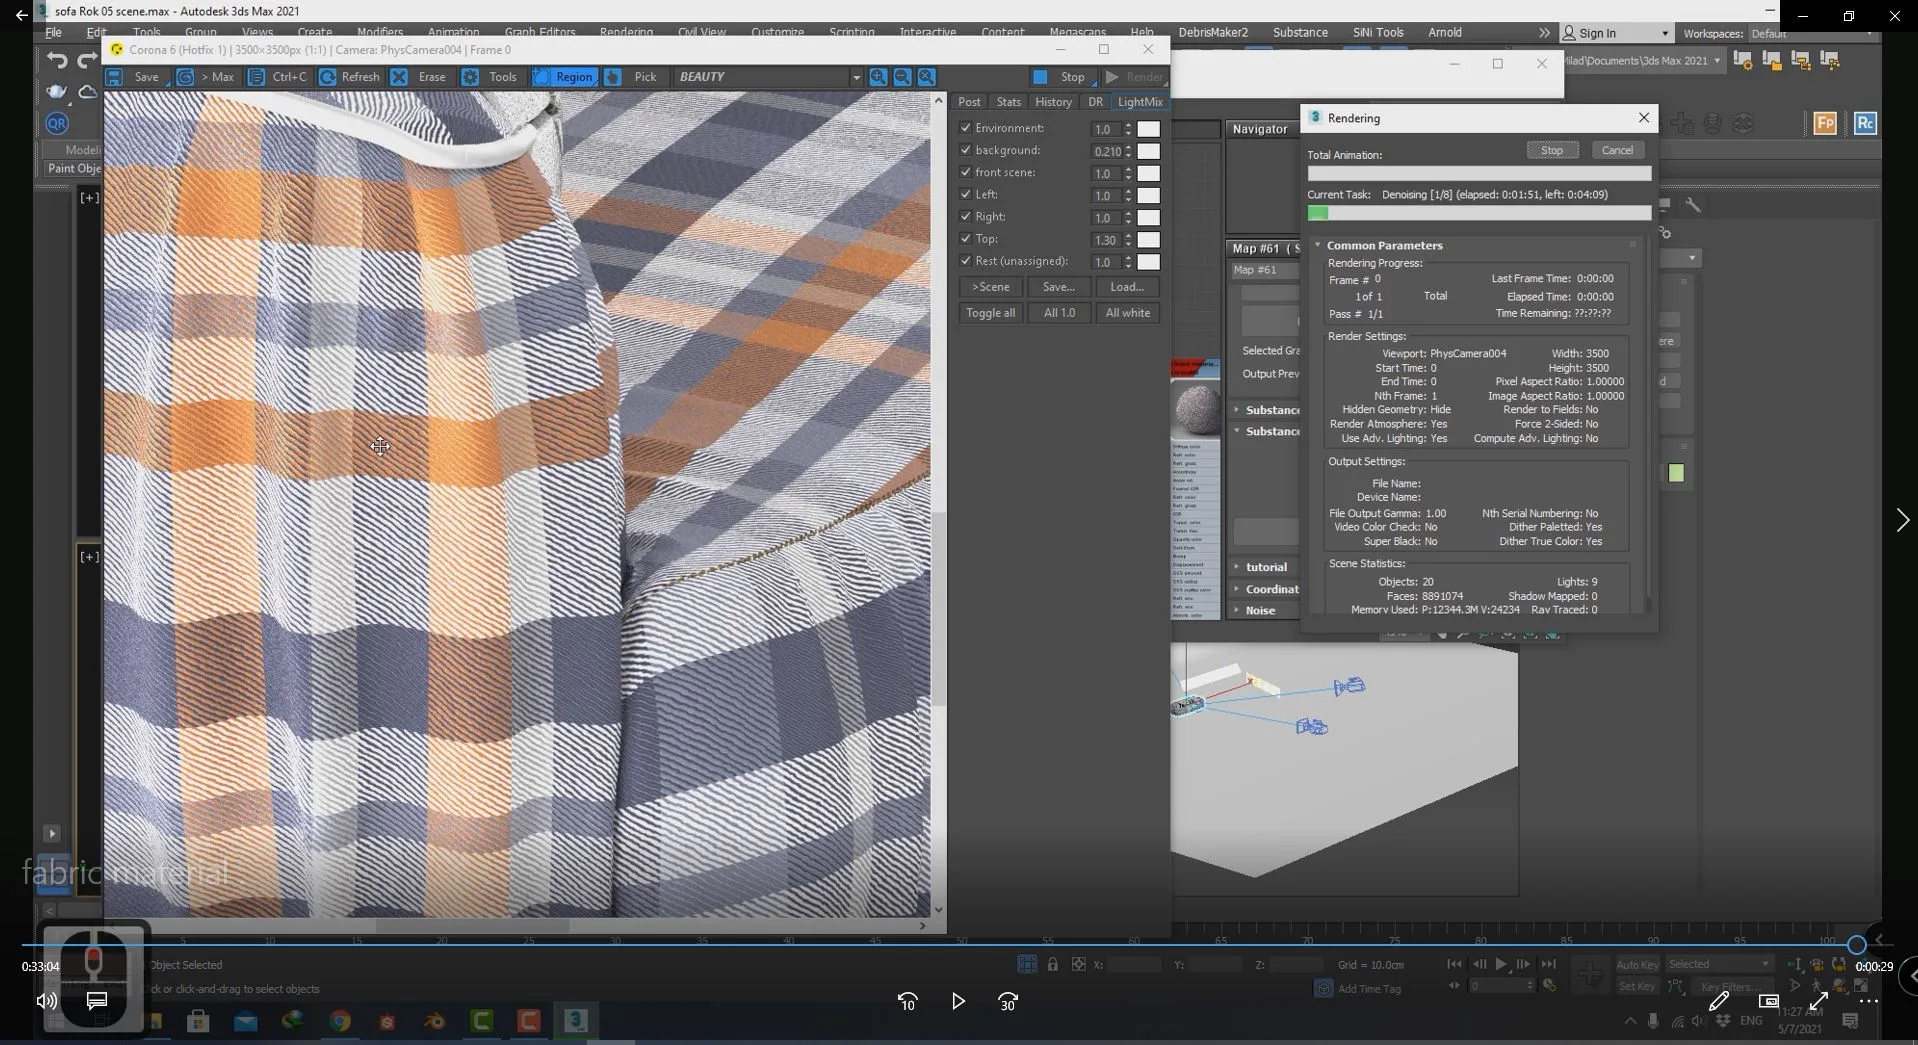 How to Create Fabric Material in Substance Designer